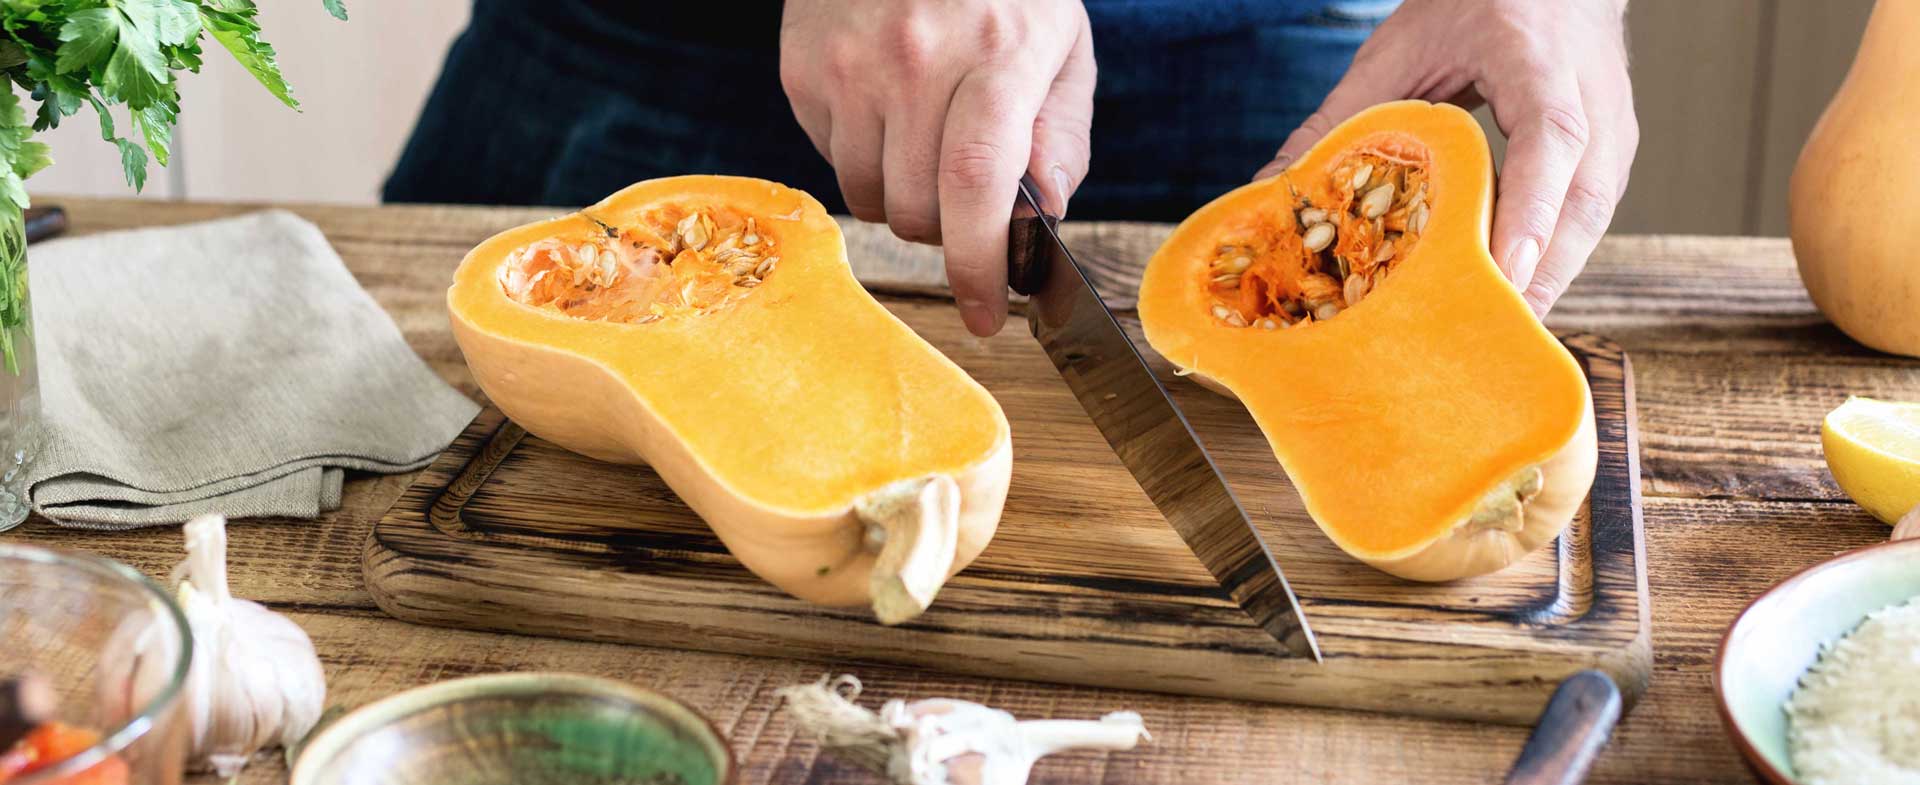 cooking with winter squash